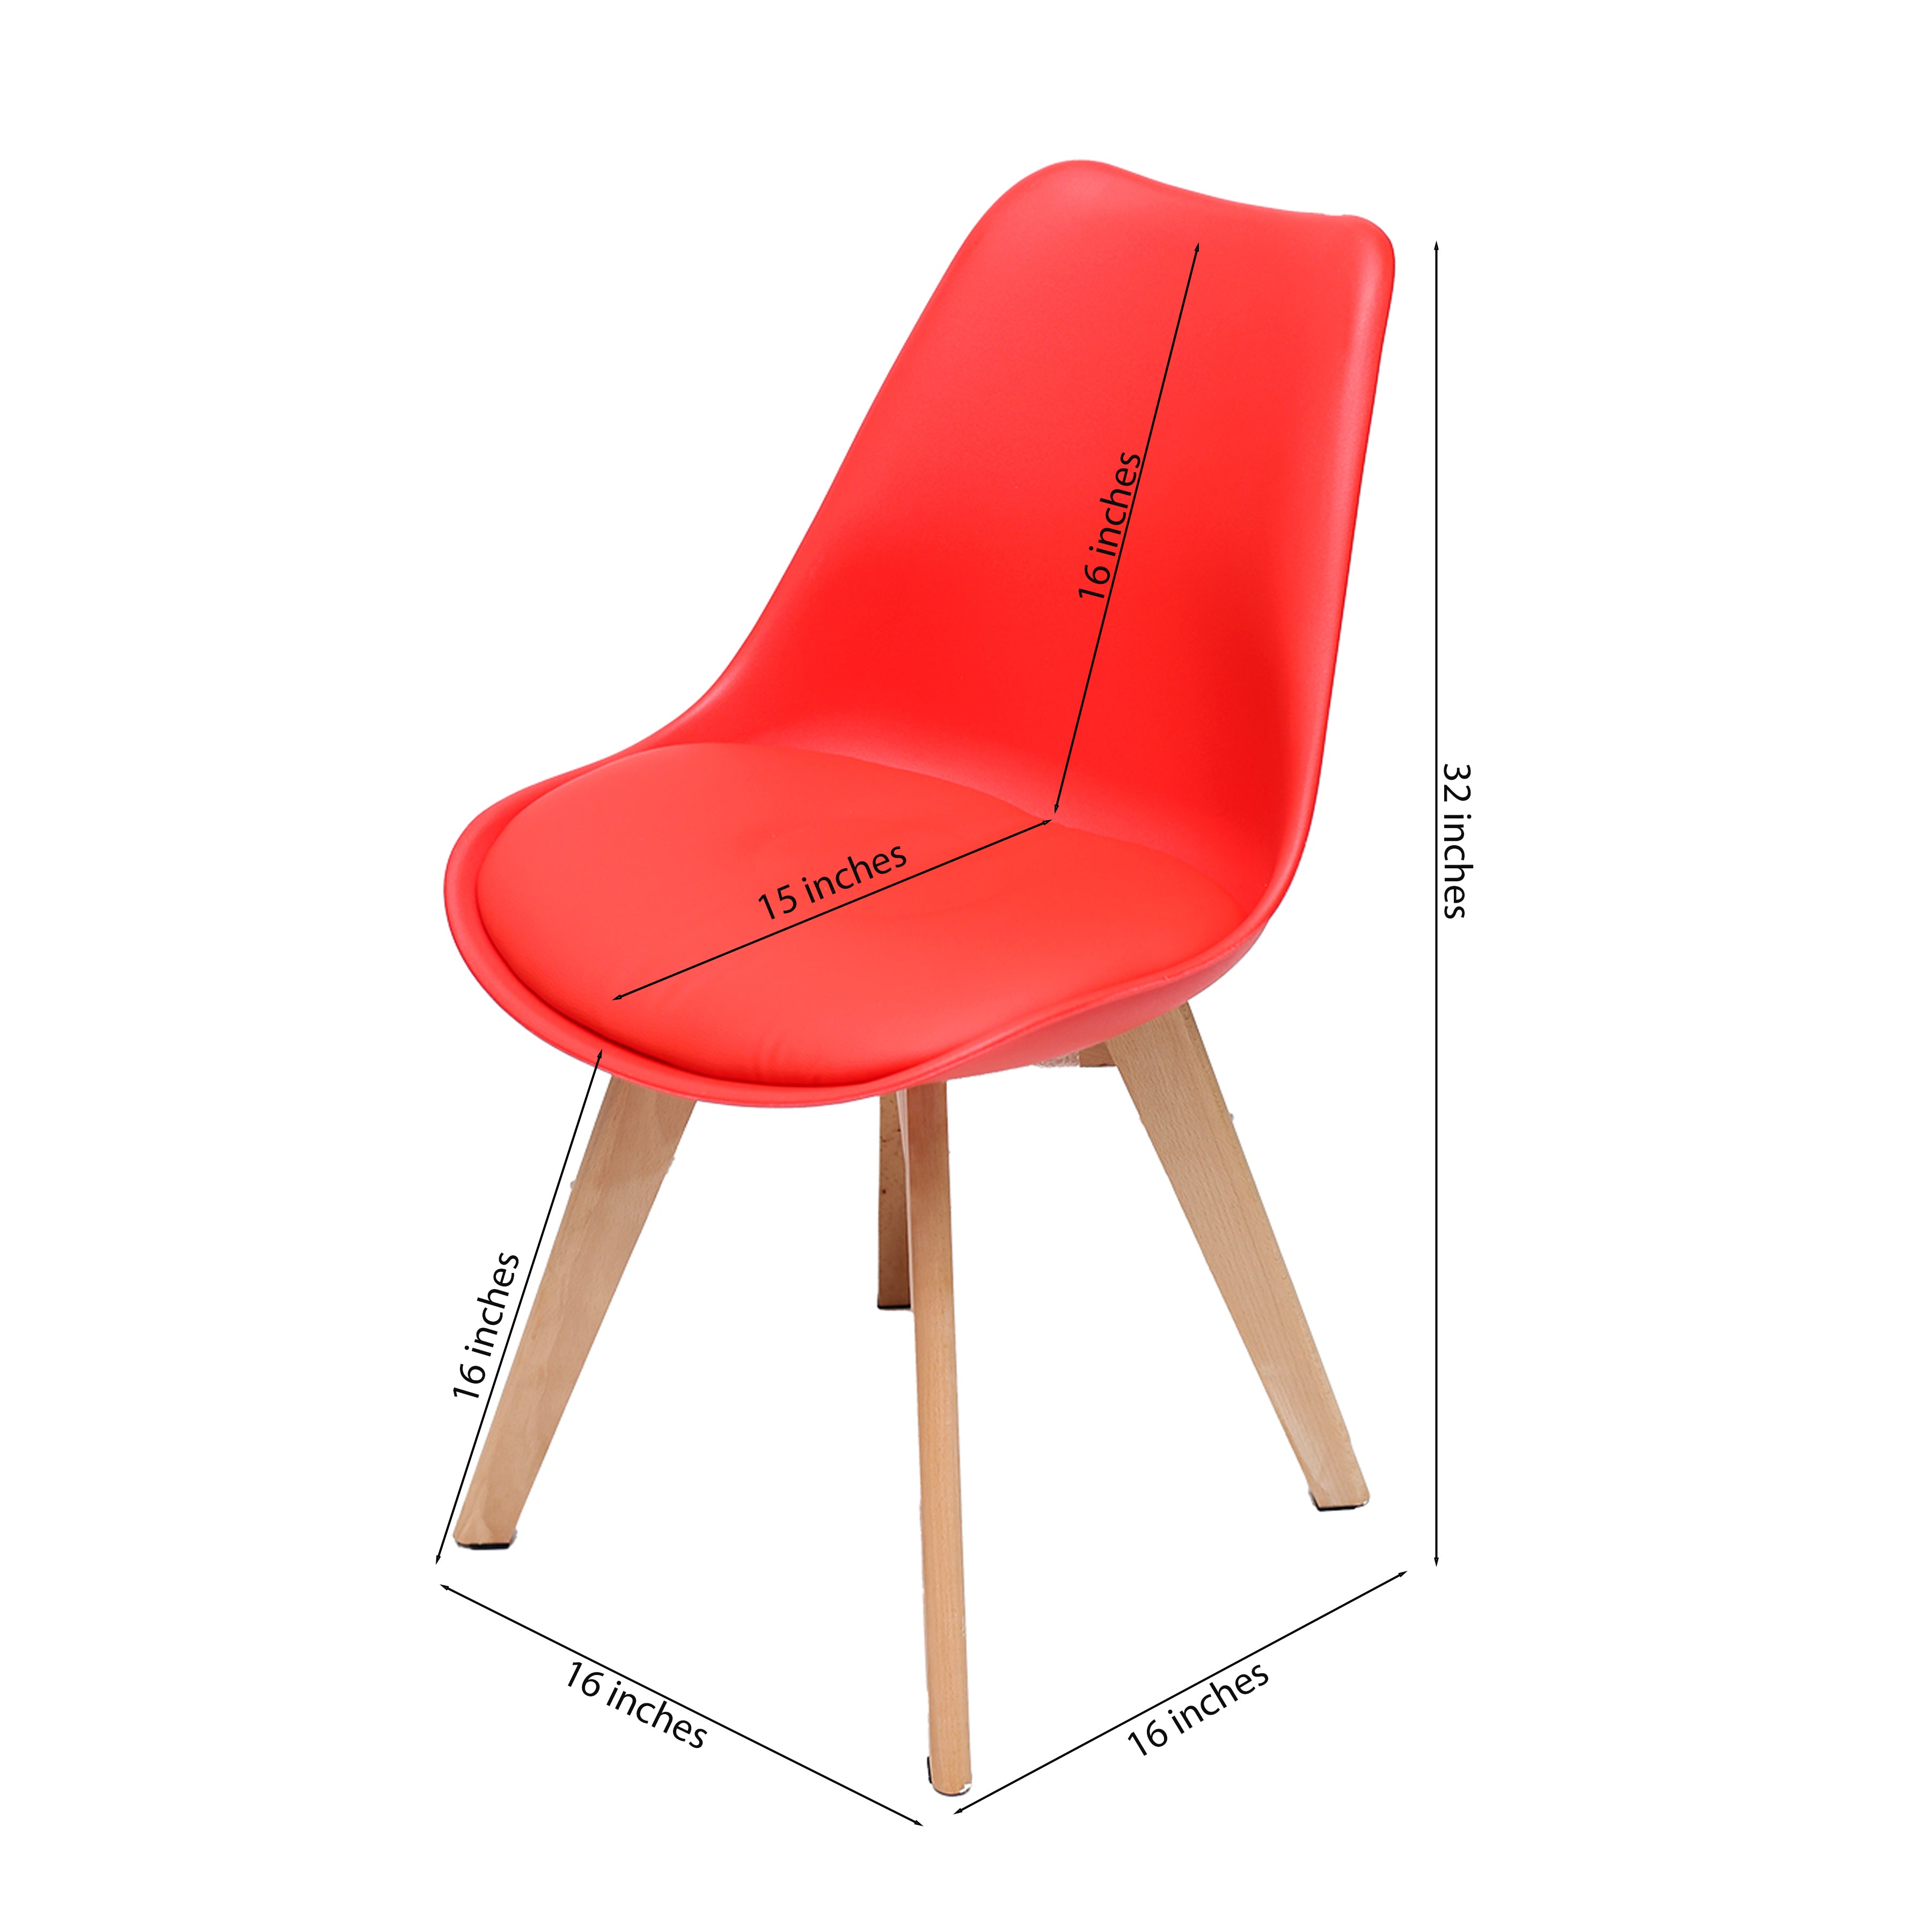 Gigma Red Chair Set of 2